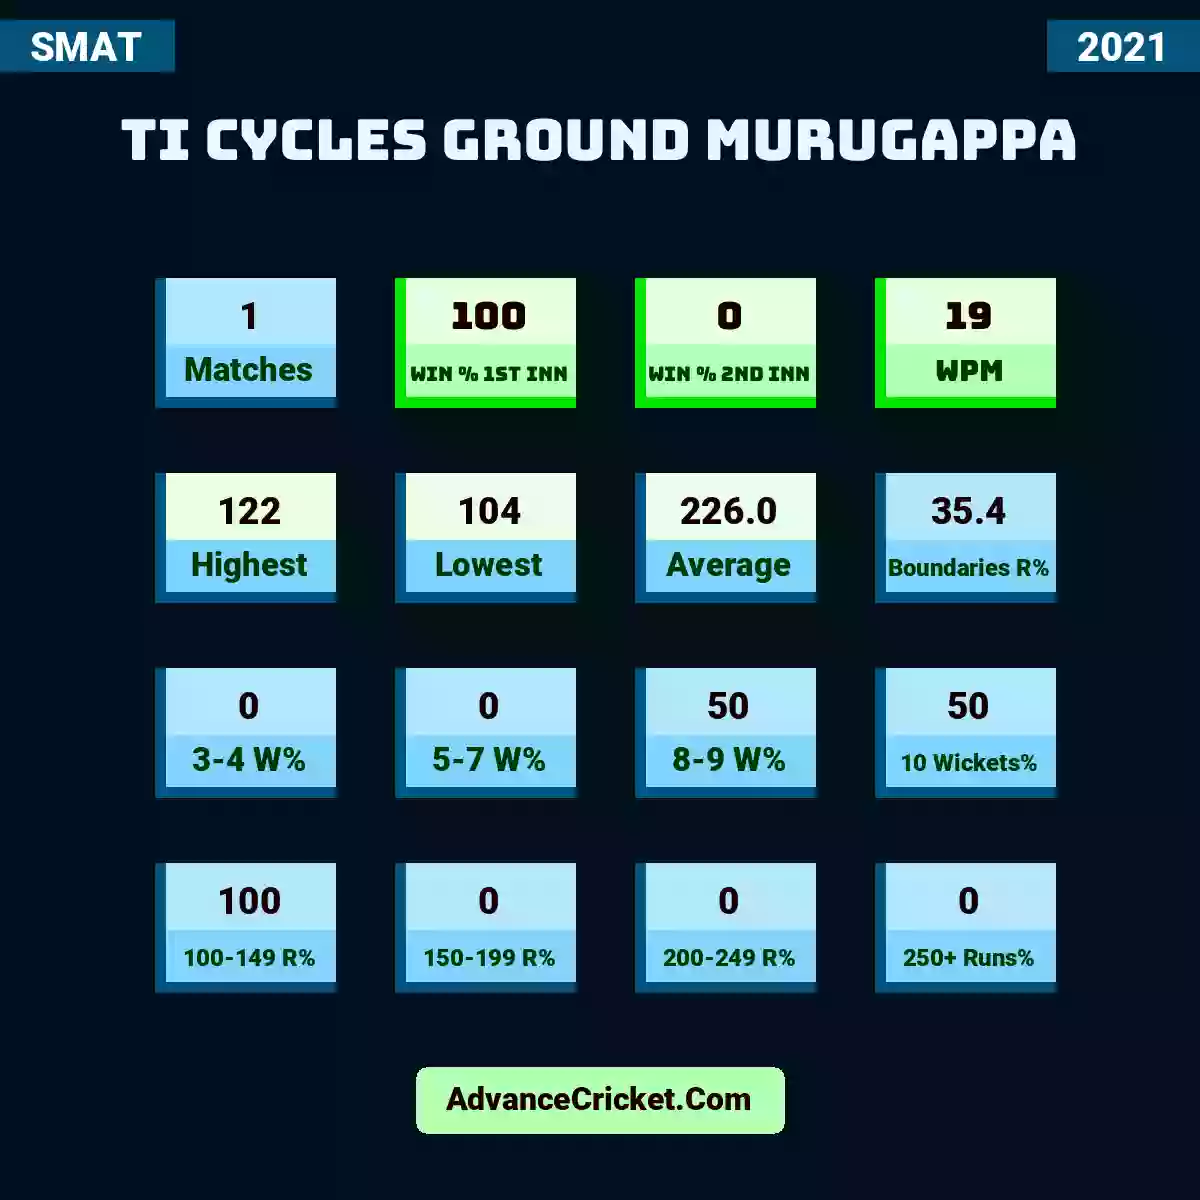 Image showing TI Cycles Ground Murugappa with Matches: 1, Win % 1st Inn: 100, Win % 2nd Inn: 0, WPM: 19, Highest: 122, Lowest: 104, Average: 226.0, Boundaries R%: 35.4, 3-4 W%: 0, 5-7 W%: 0, 8-9 W%: 50, 10 Wickets%: 50, 100-149 R%: 100, 150-199 R%: 0, 200-249 R%: 0, 250+ Runs%: 0.